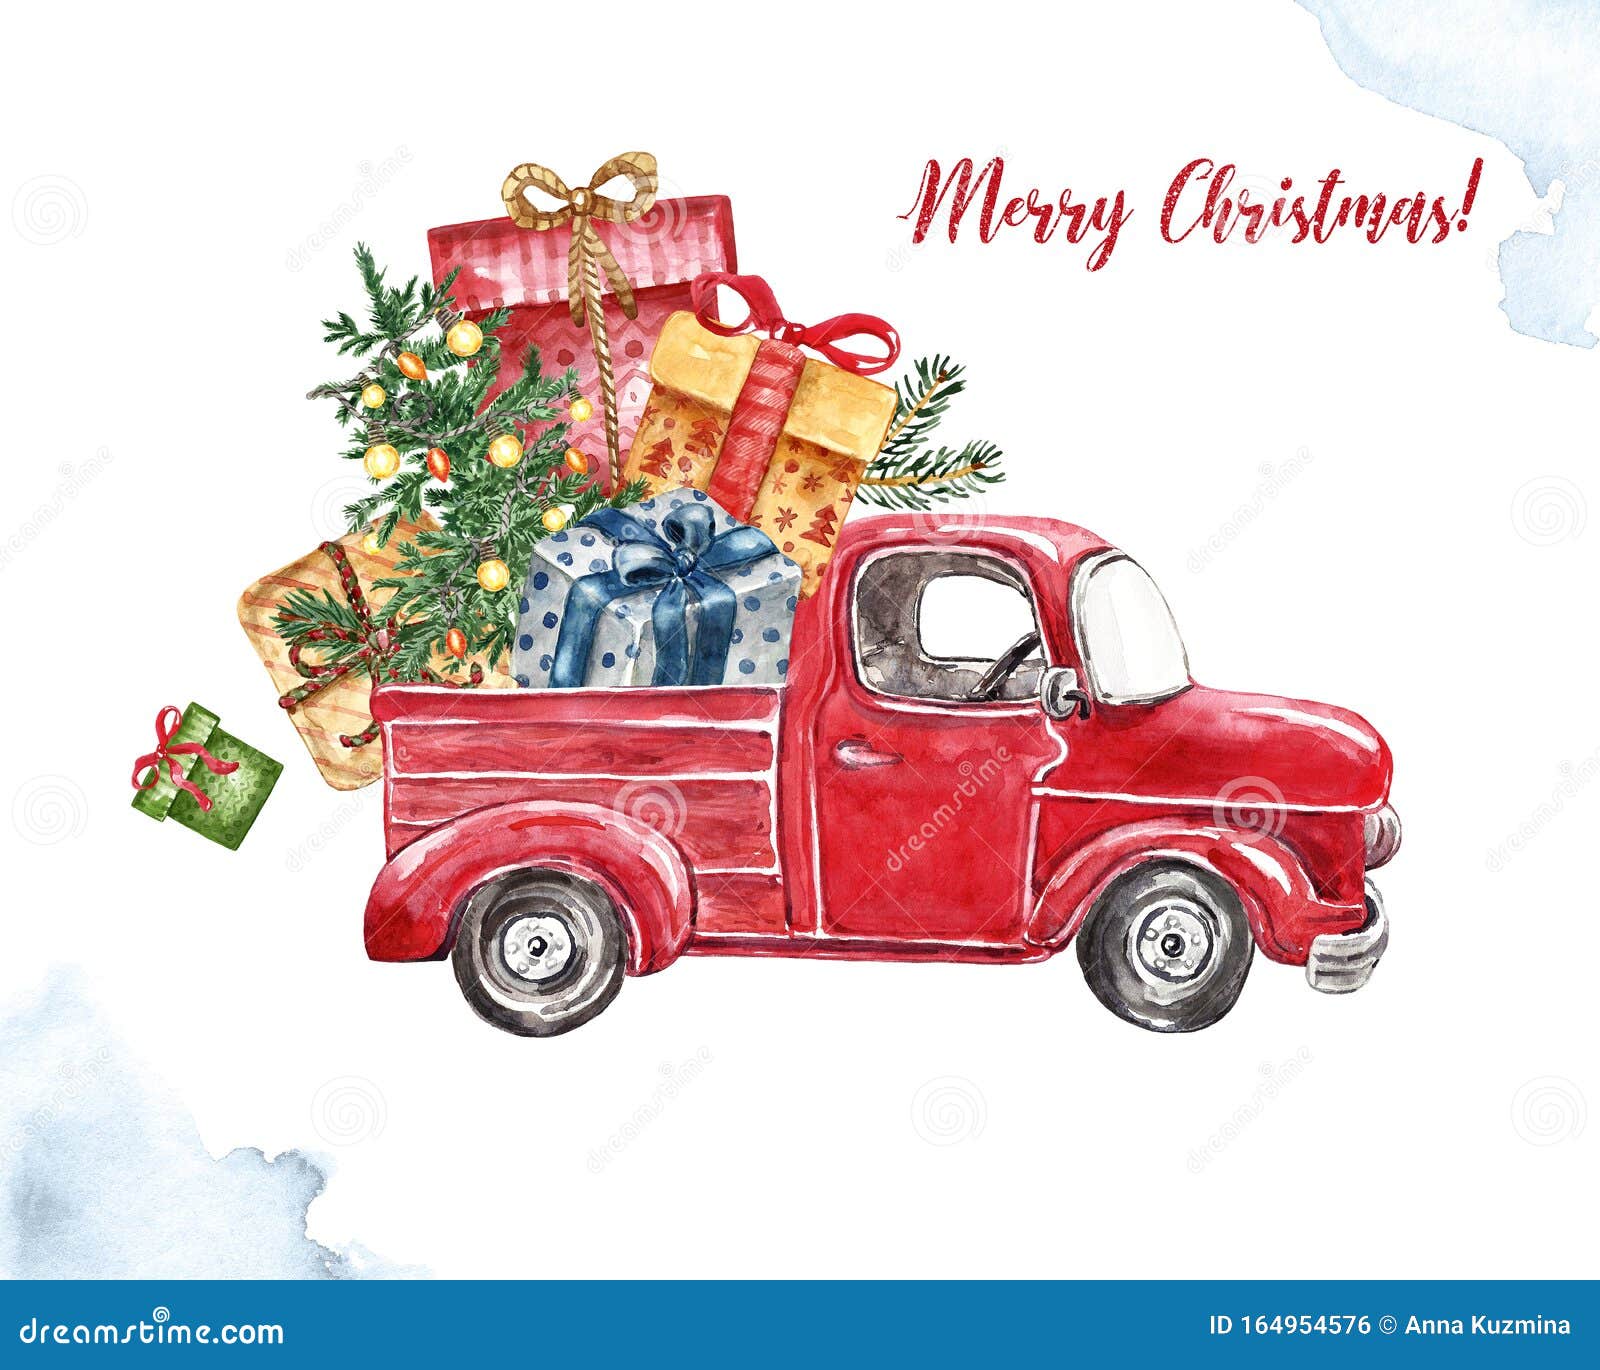 watercolor christmas car . red vintage truck with holiday fir tree and gifts,  on white background.